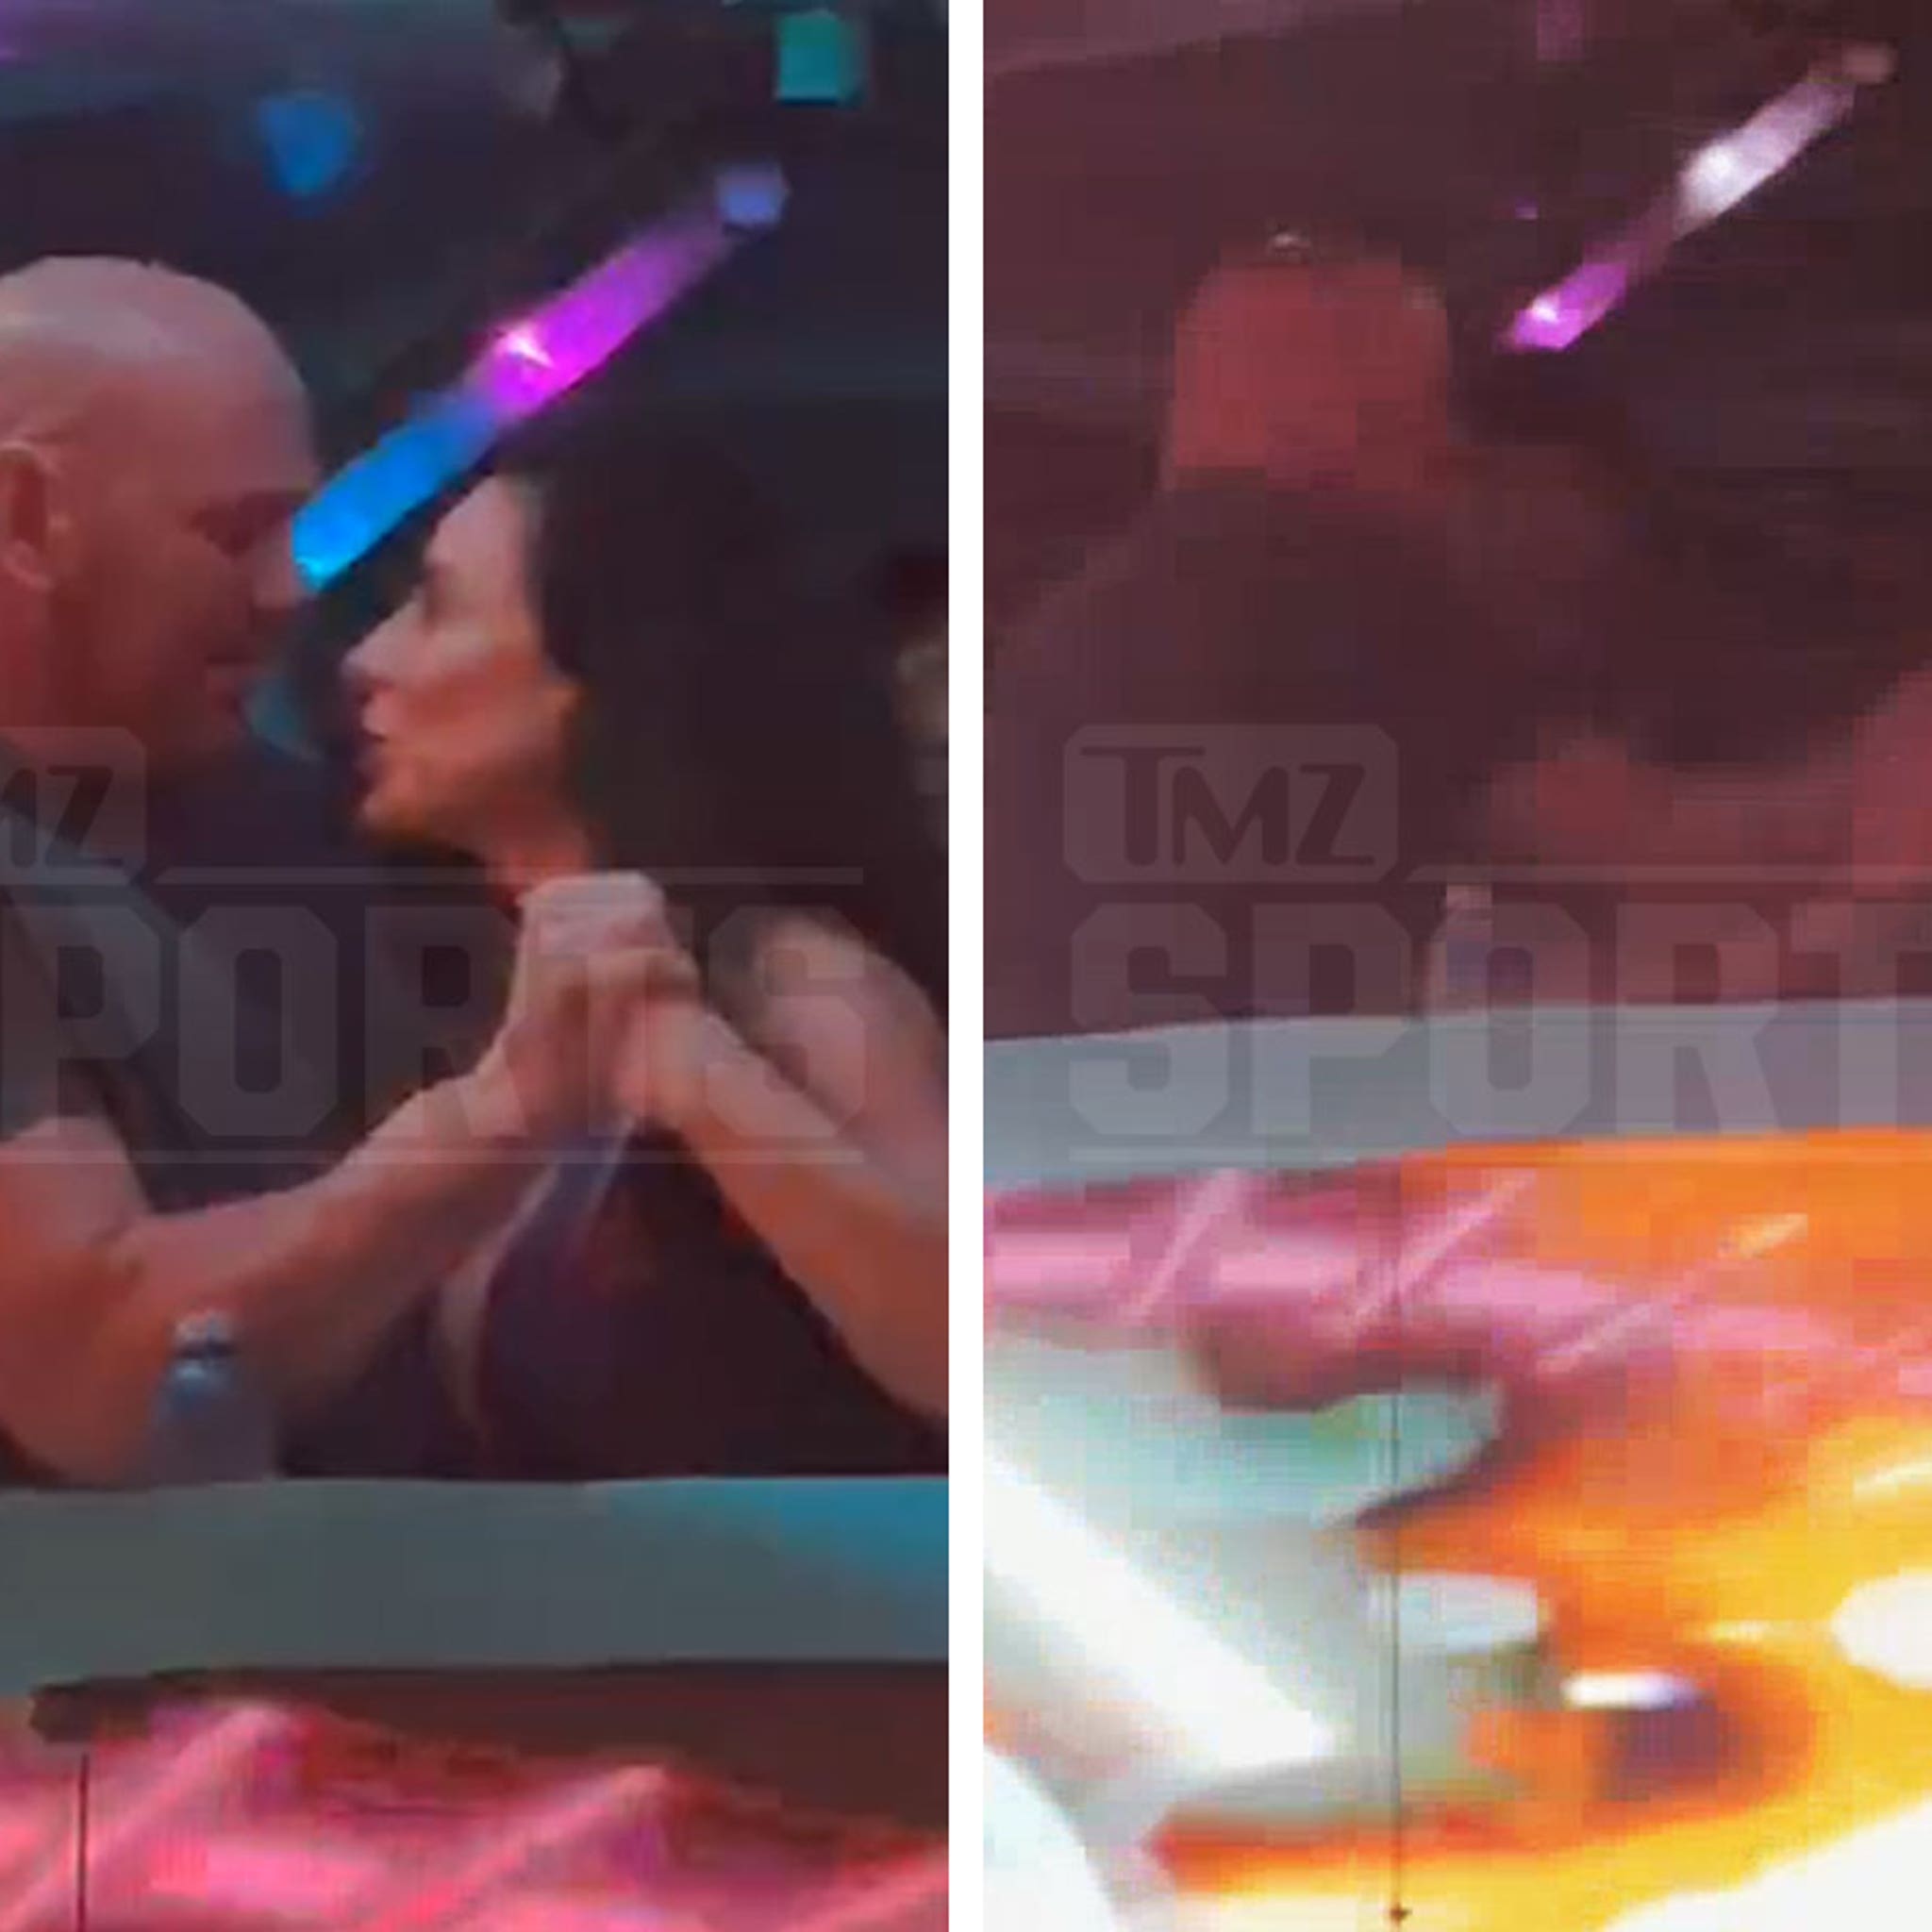 Dana White and Wife, Anne, in Drunken Nightclub Fight on New Years pic pic